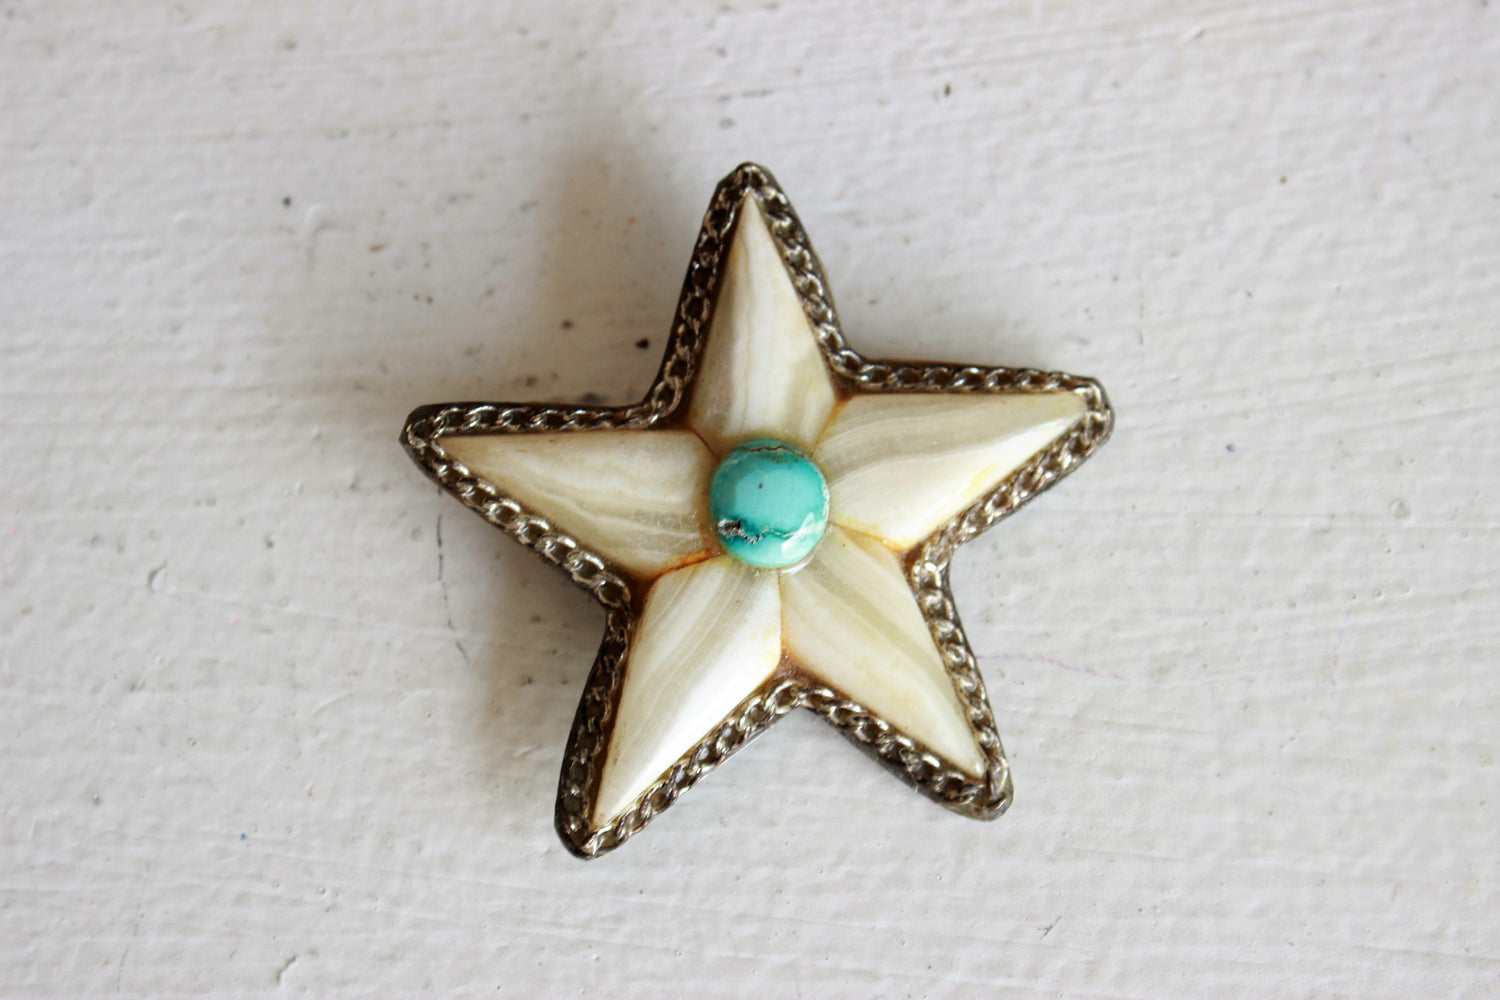 Vintage Star or Starfish Brooch of Stone and Turquoise